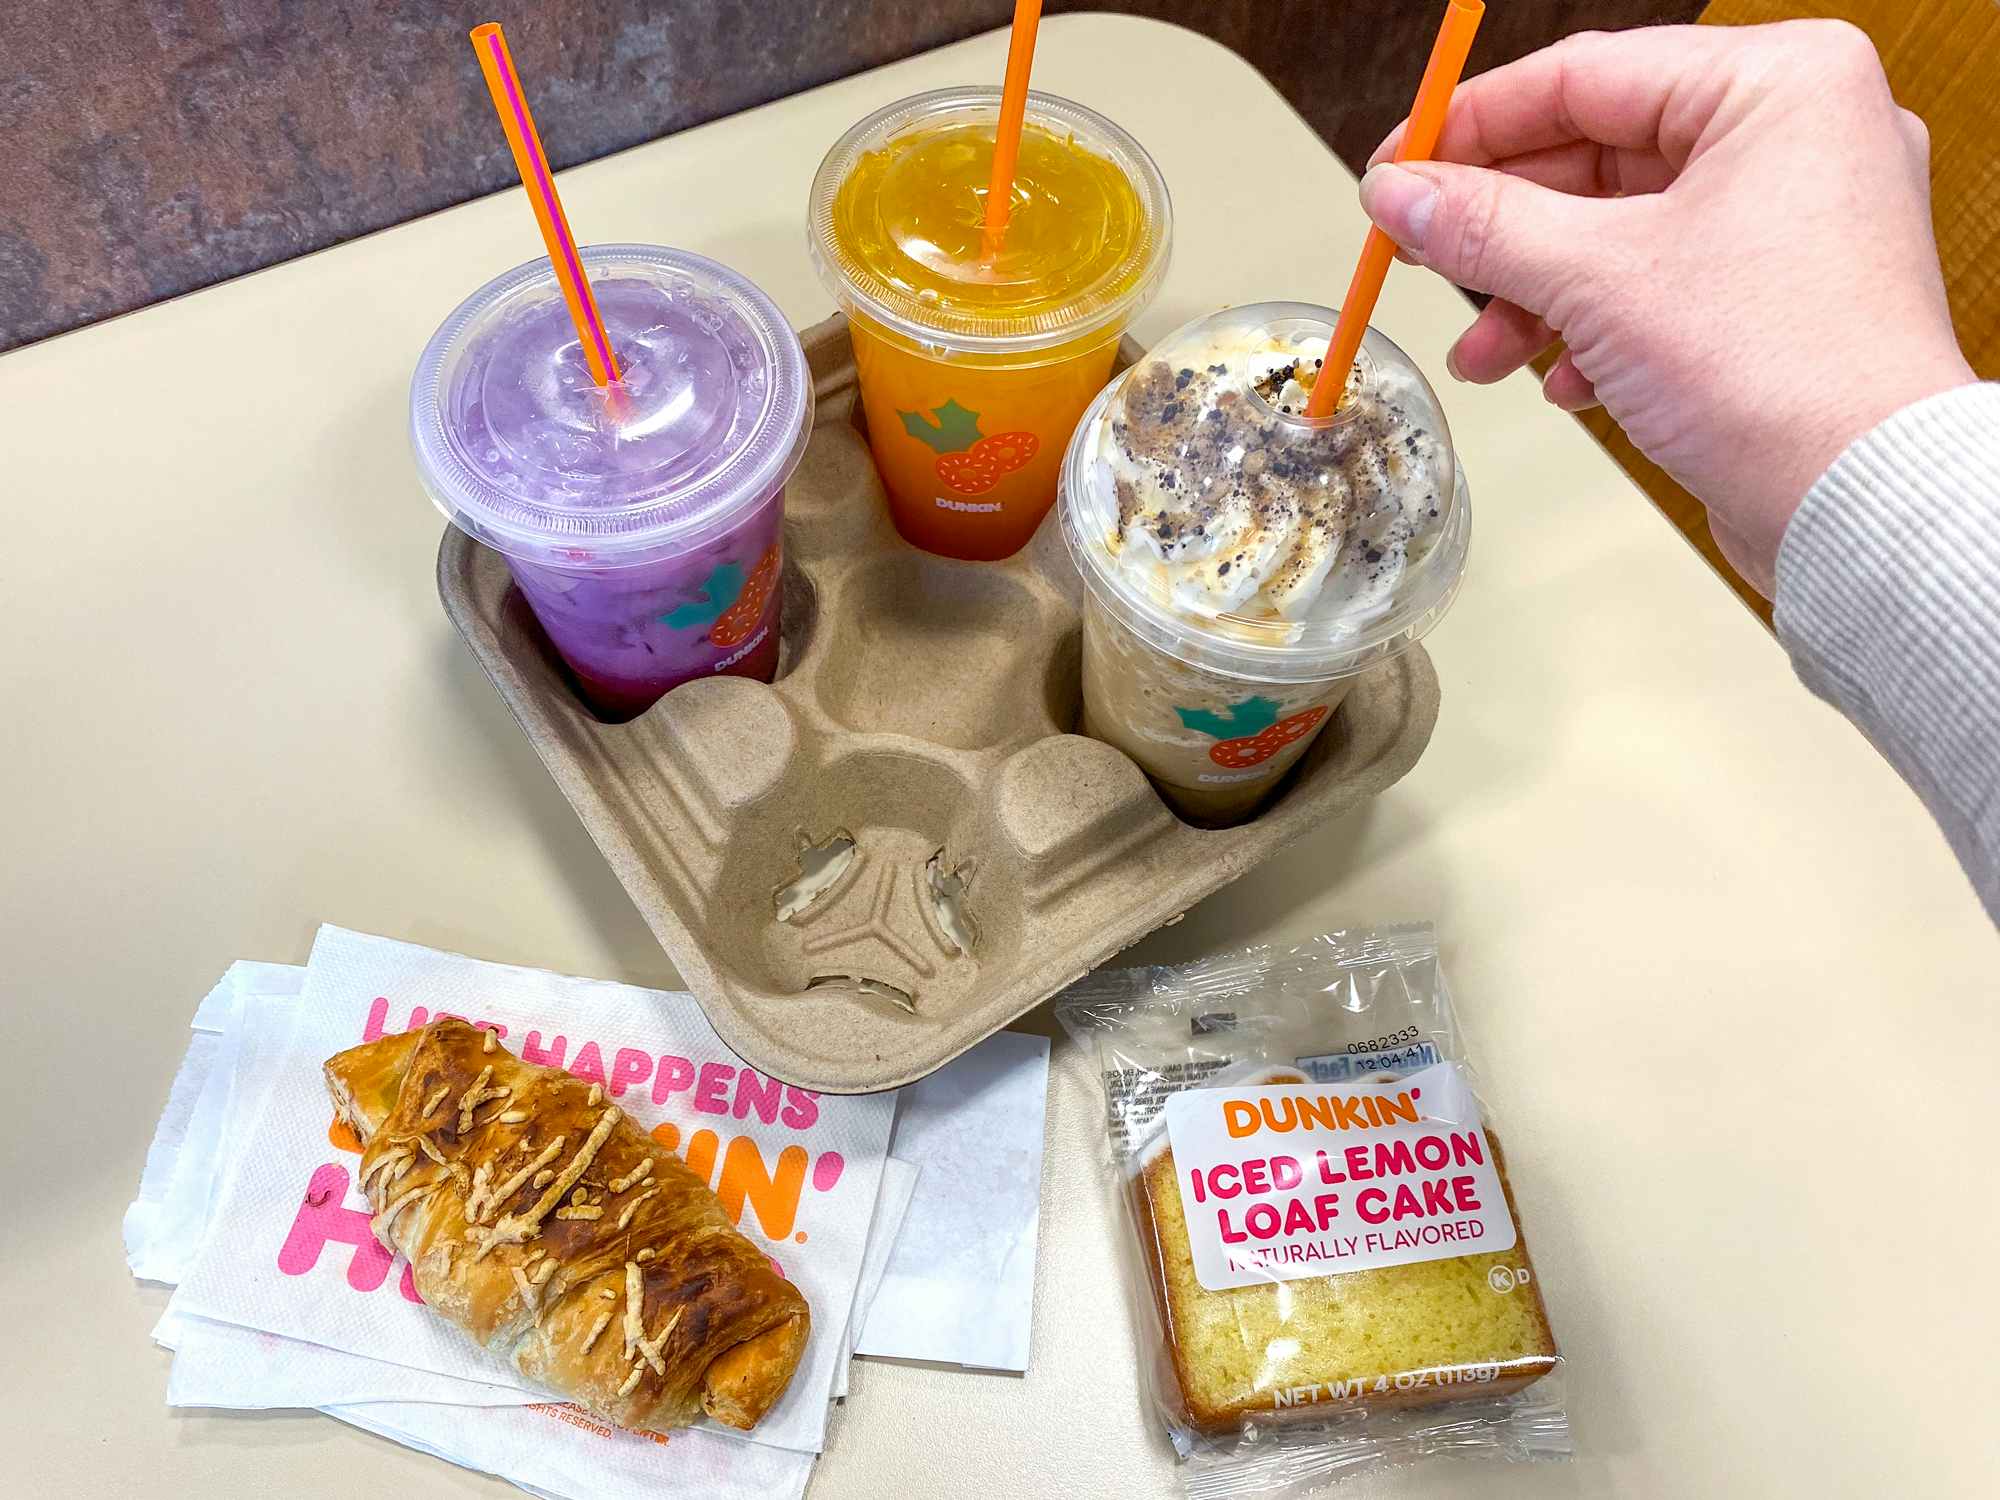 dunkin donuts refreshers, croissant stuffer, iced lemon loaf cake, and frozen butter pecan swirl drink in restaurant